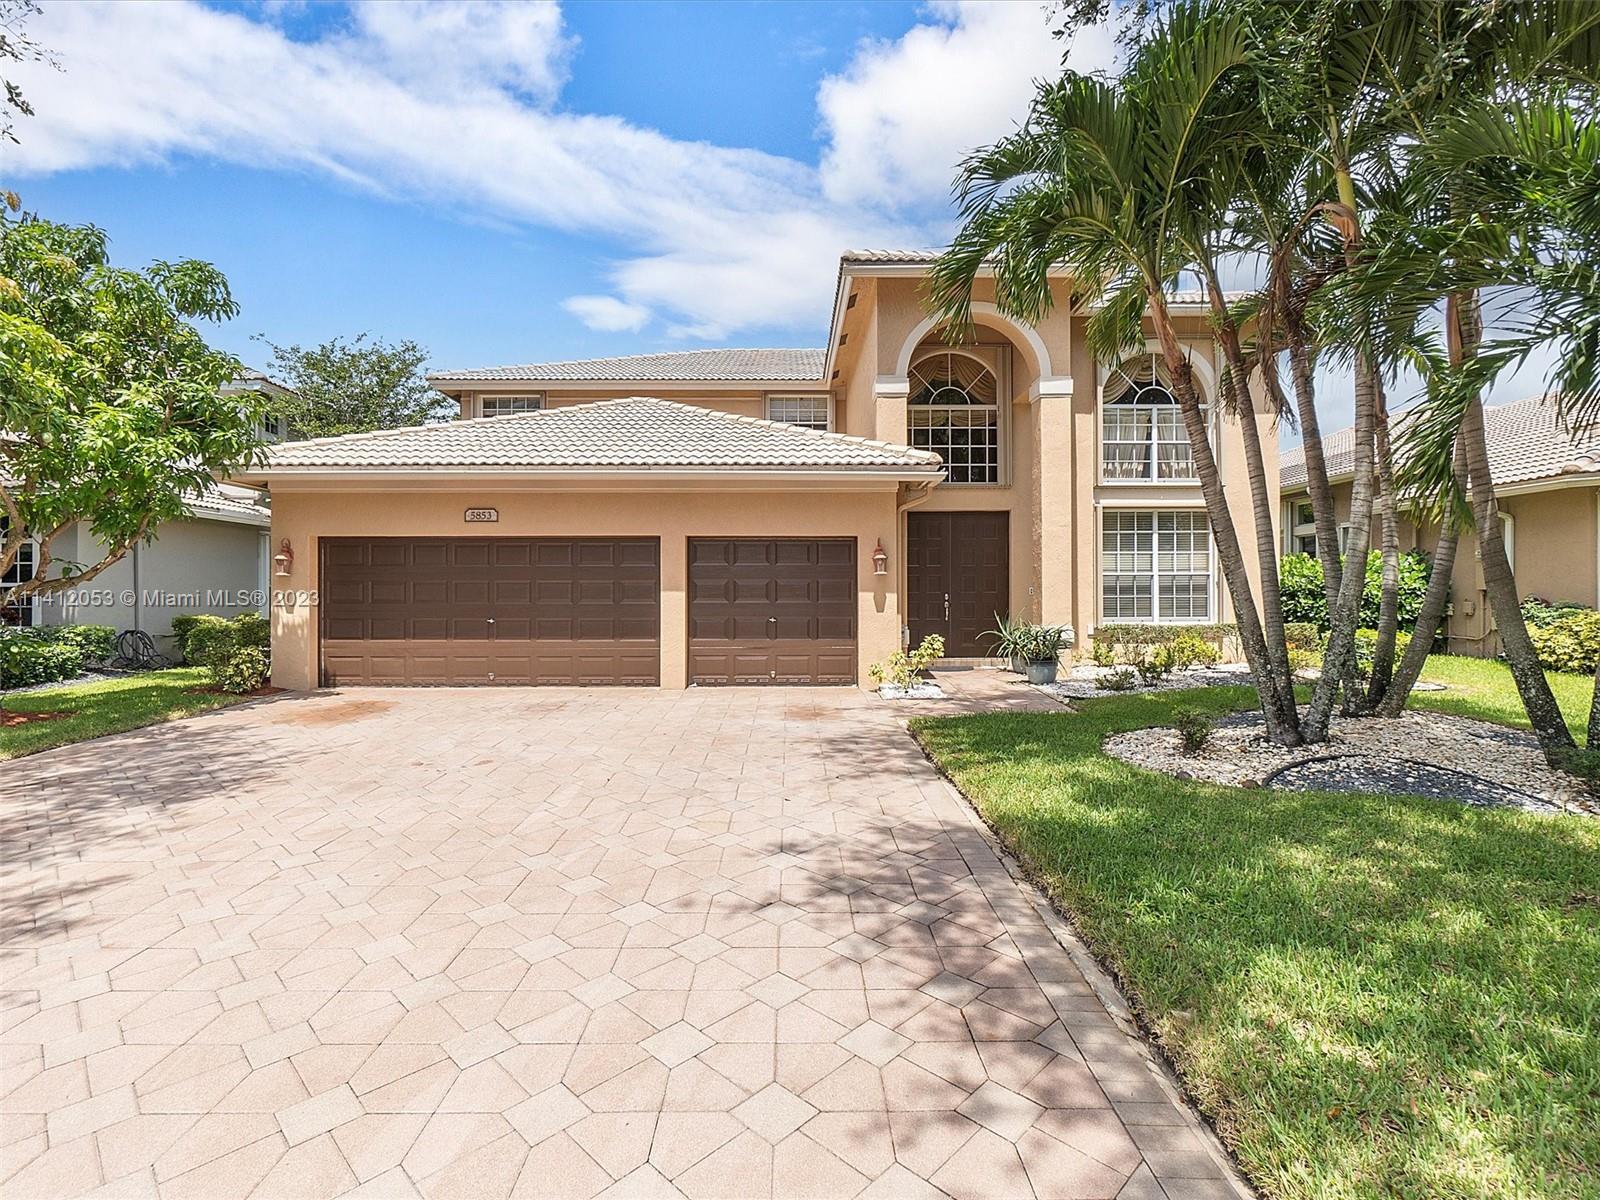 5853 NW 54th Cir, Coral Springs, Florida 33067, 4 Bedrooms Bedrooms, ,3 BathroomsBathrooms,Residential,For Sale,5853 NW 54th Cir,A11412053